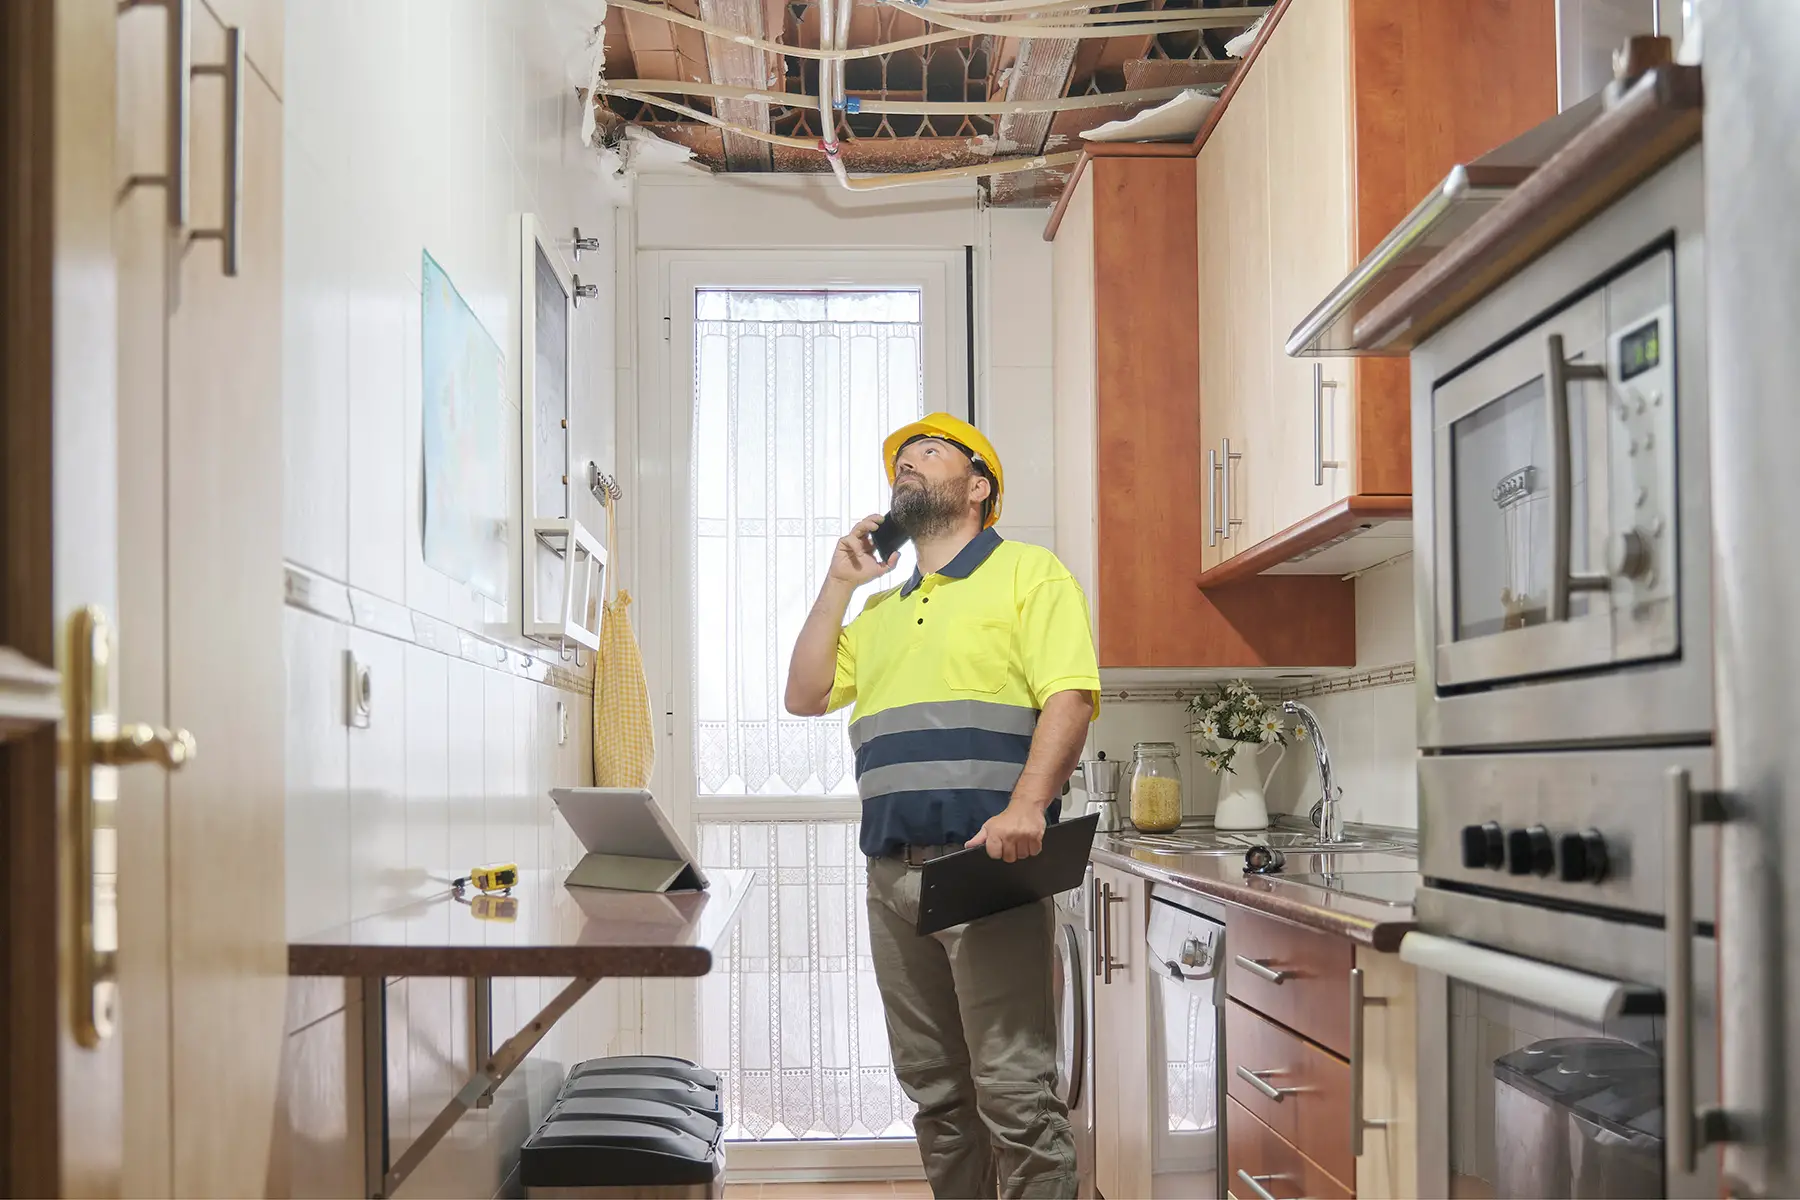 A surveyor stands in a kitchen on the phone, looking up at exposed pipes running along the ceiling